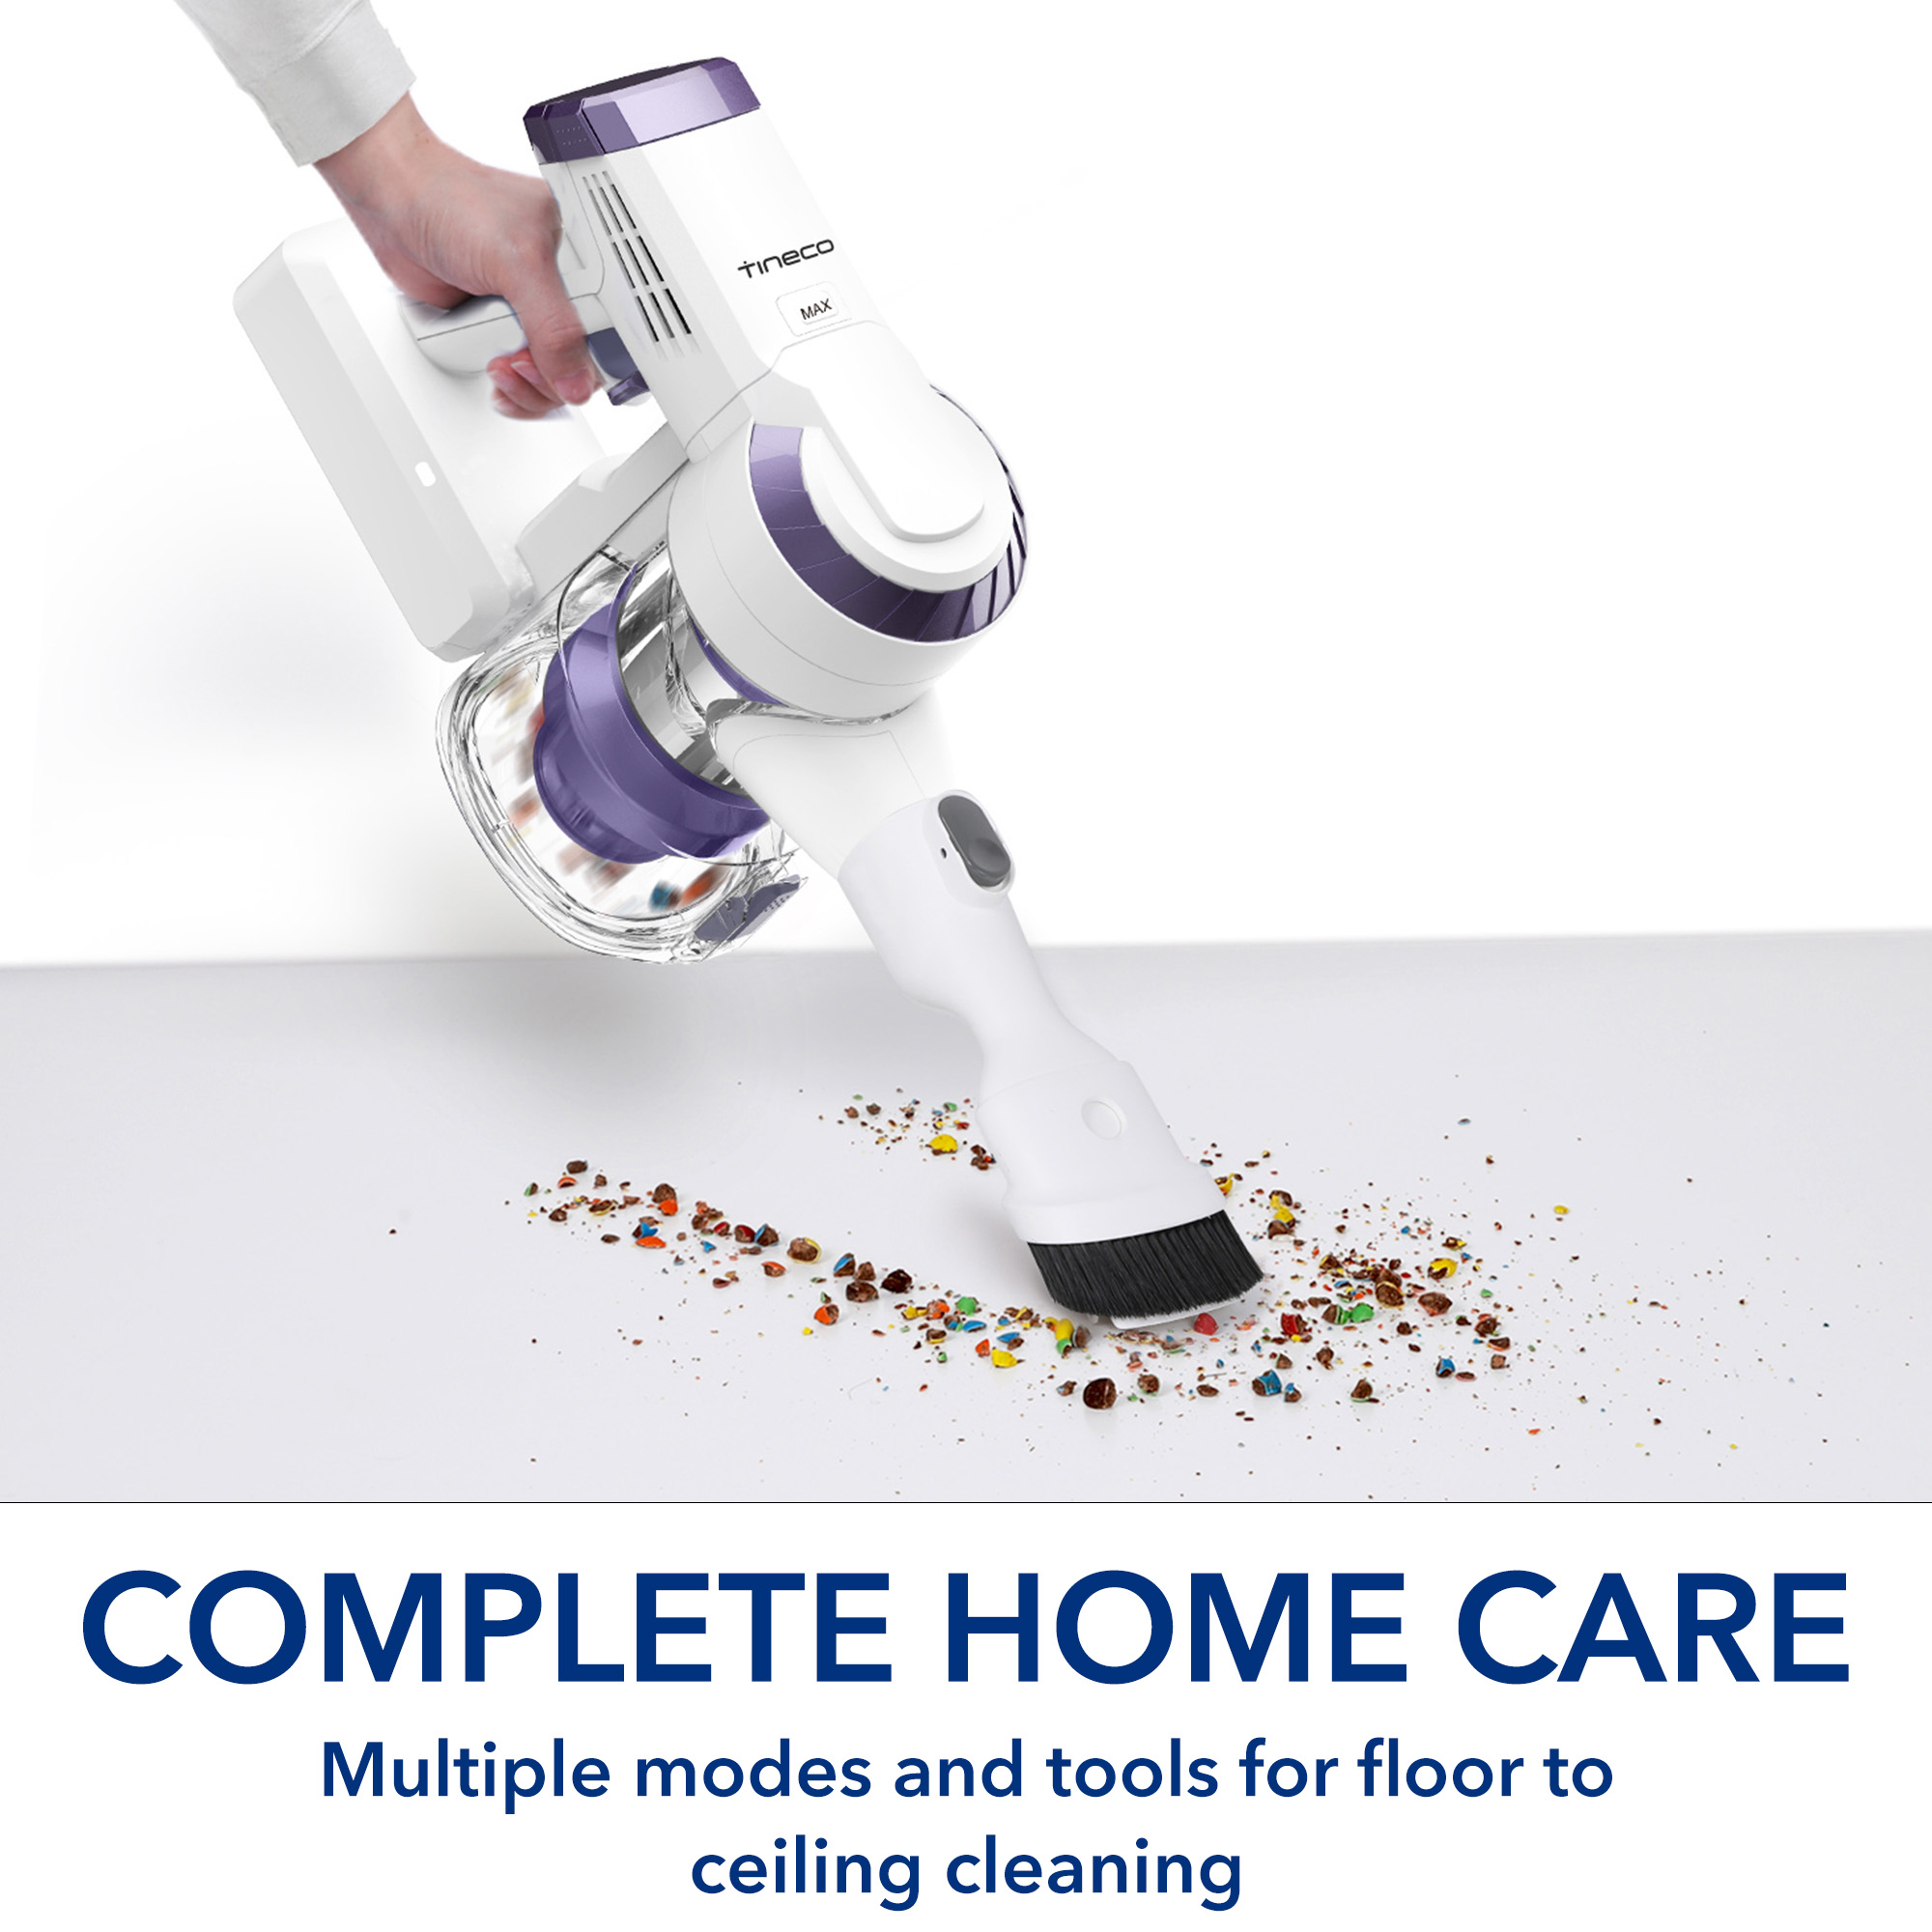 Tineco A10-D Plus Flex - Cordless Ultralight Stick Vacuum Cleaner for Hard Floors and Low-Pile Rugs with Additional Accessory Kit - image 3 of 8